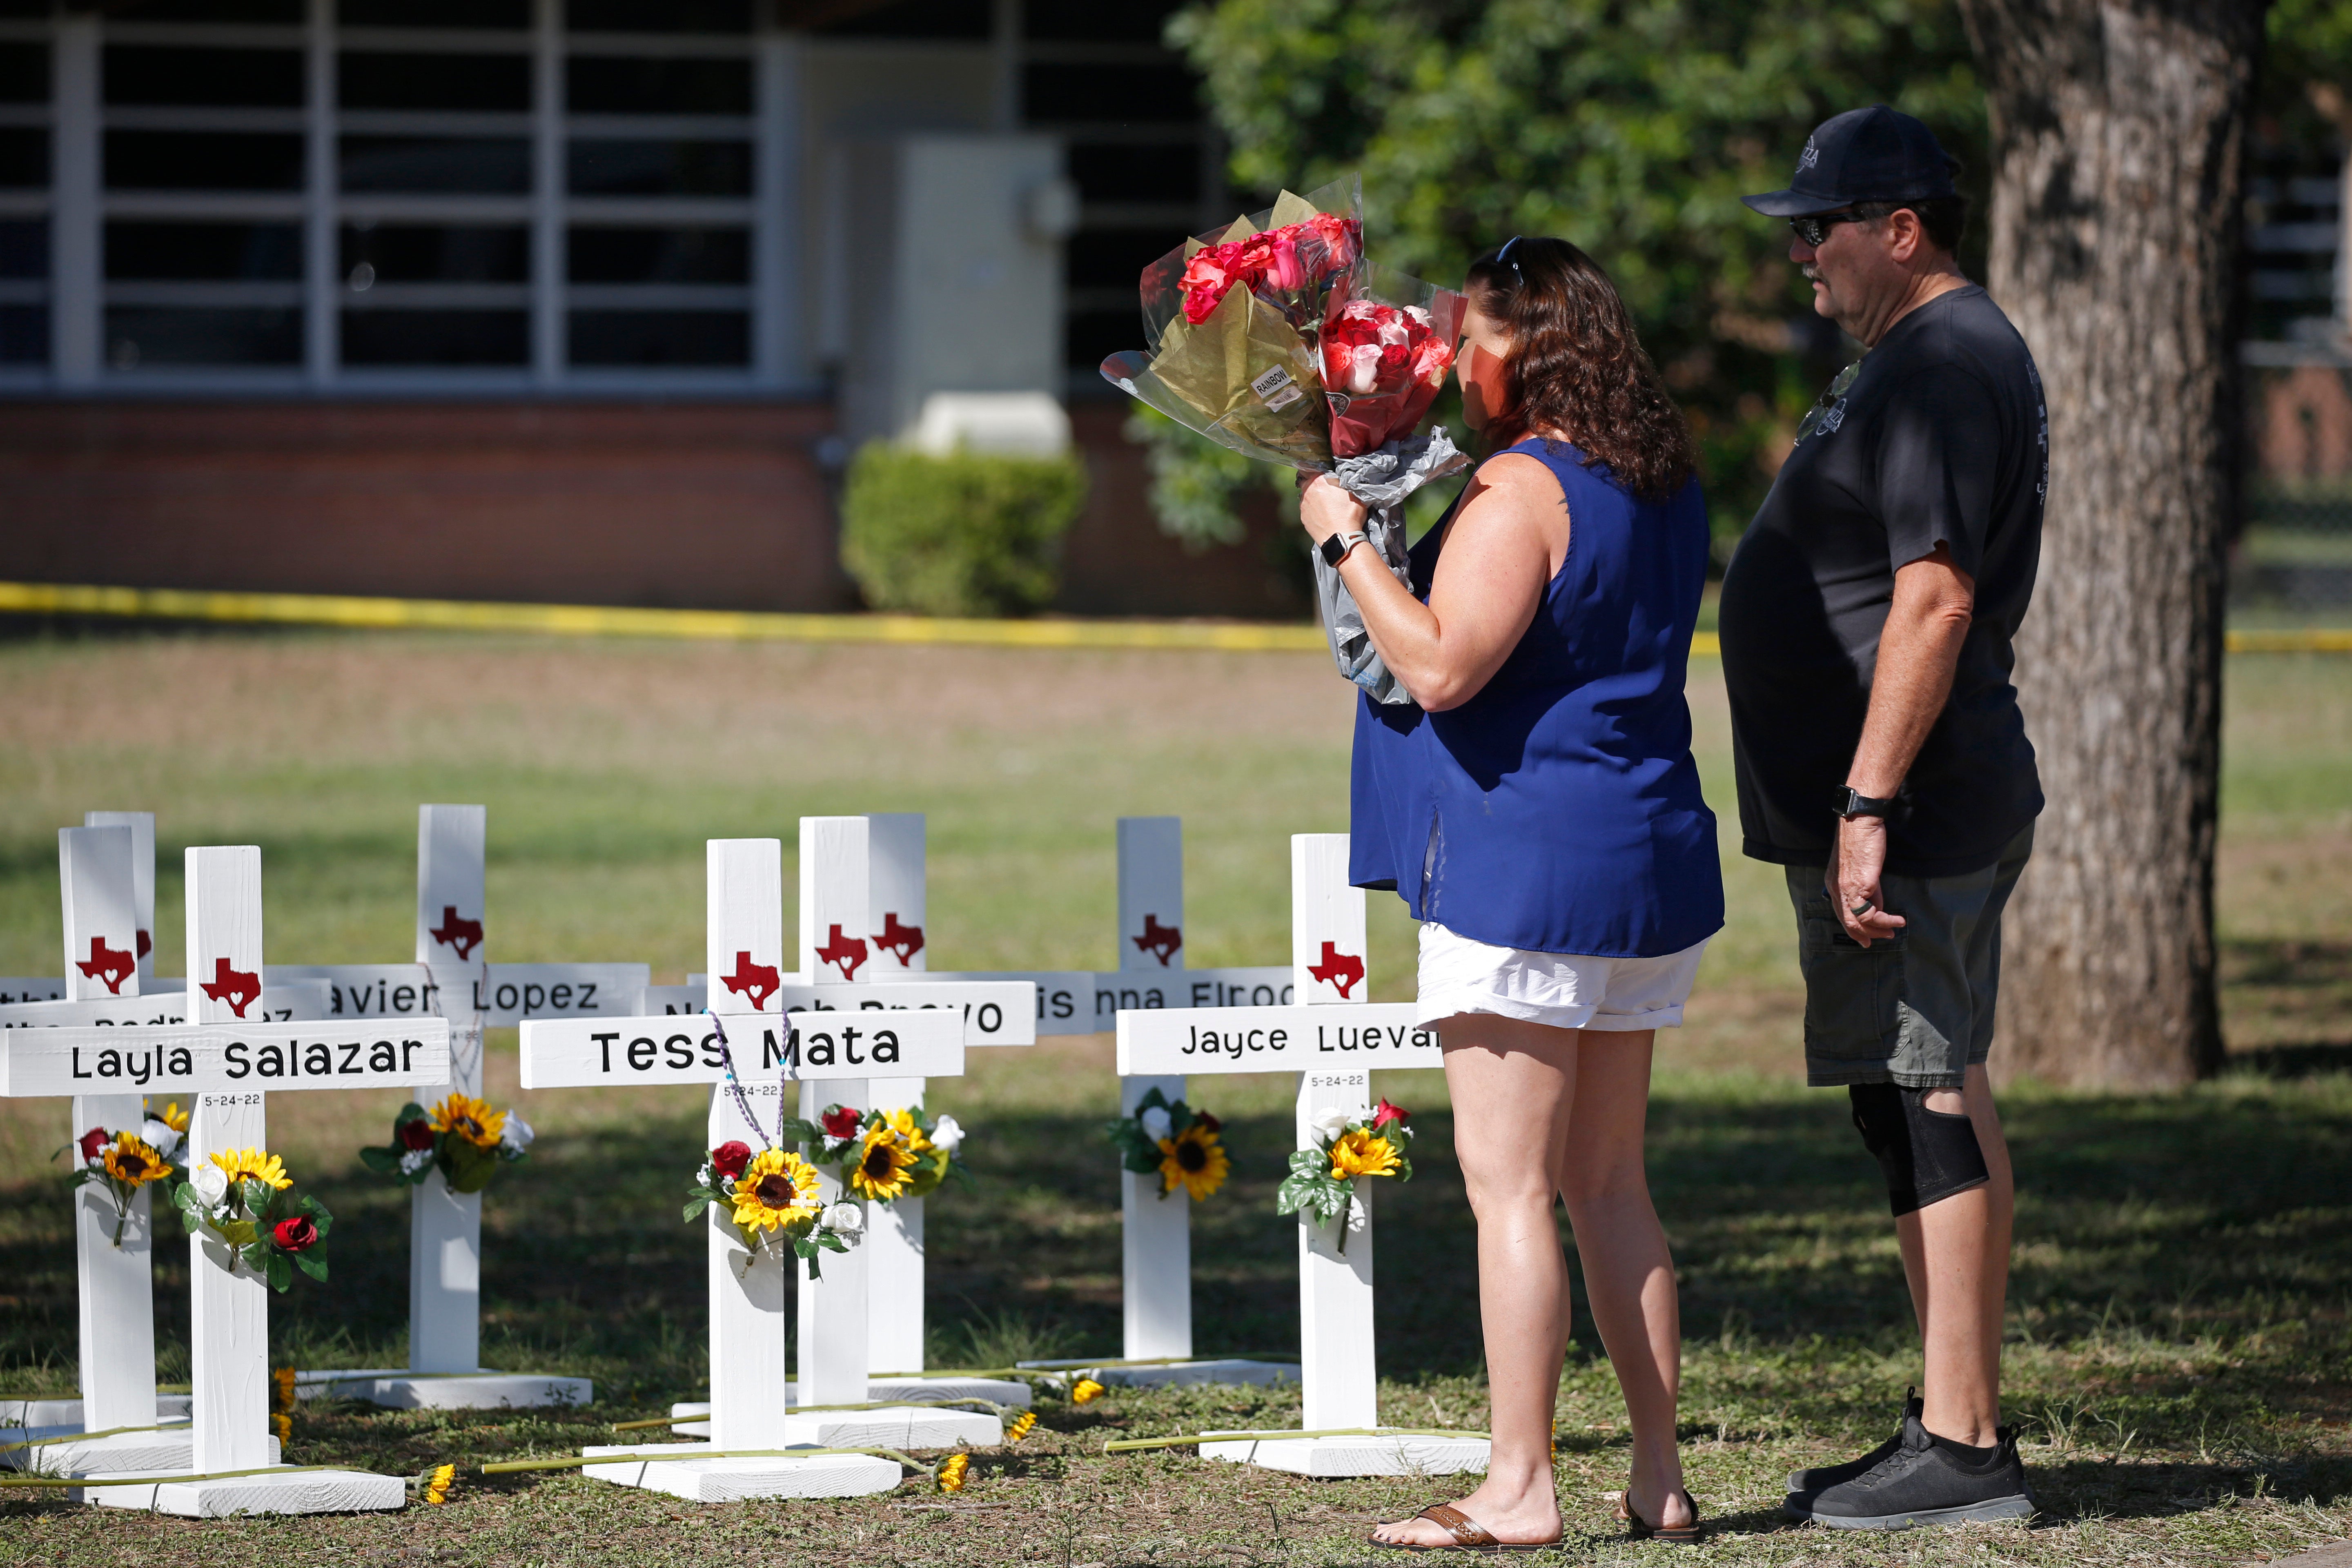 A couple prepare to place flowers on crosses with the names of children killed outside of the Robb Elementary School in Uvalde, Texas